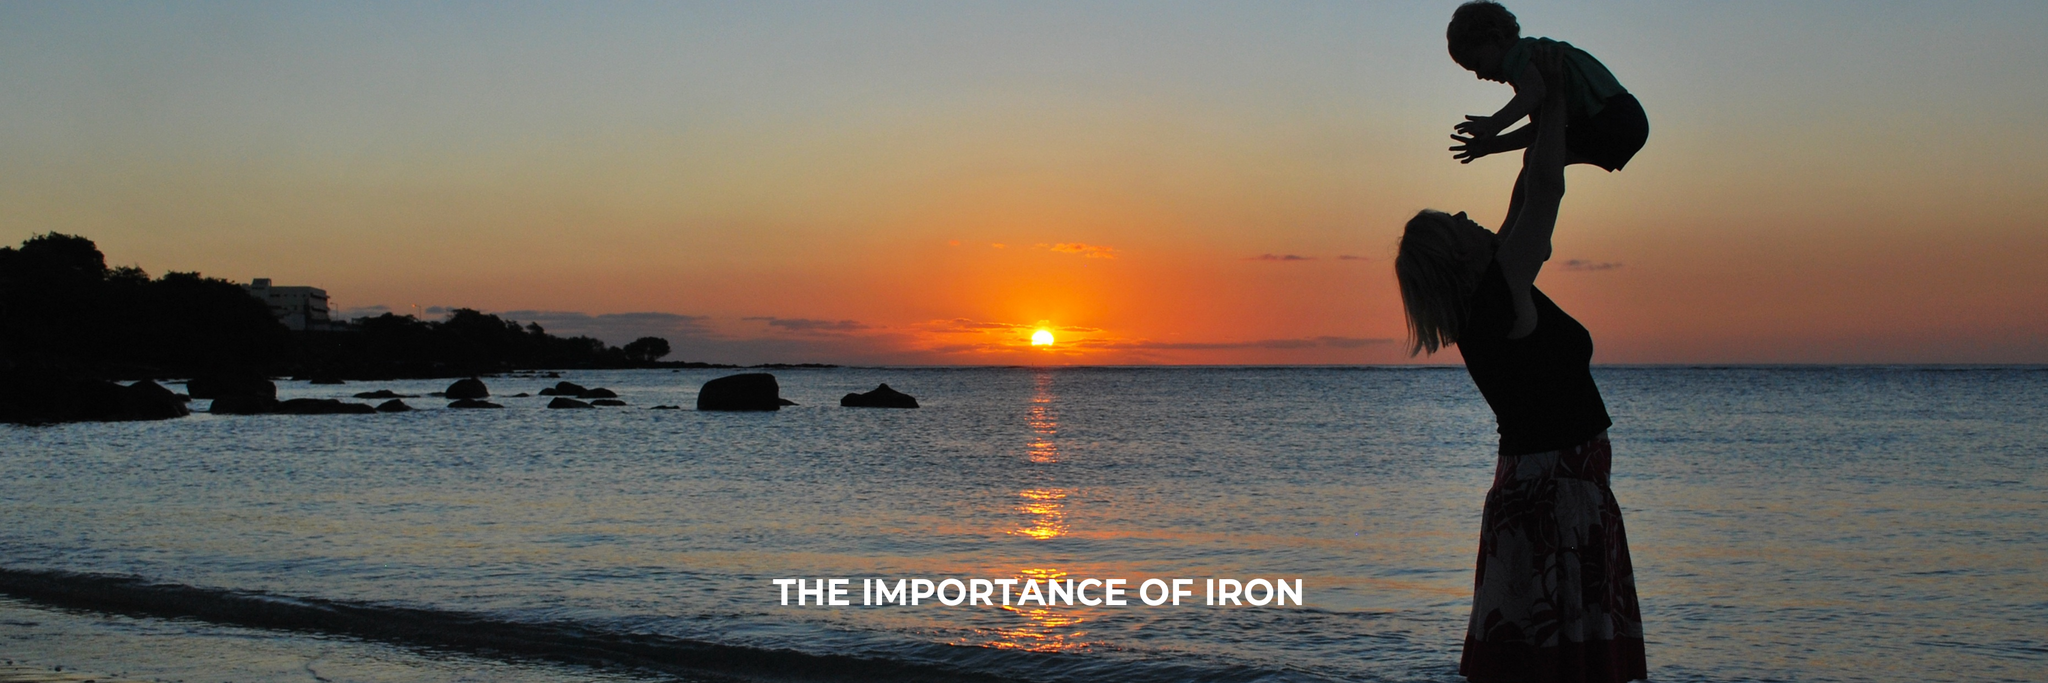 The Importance of Iron